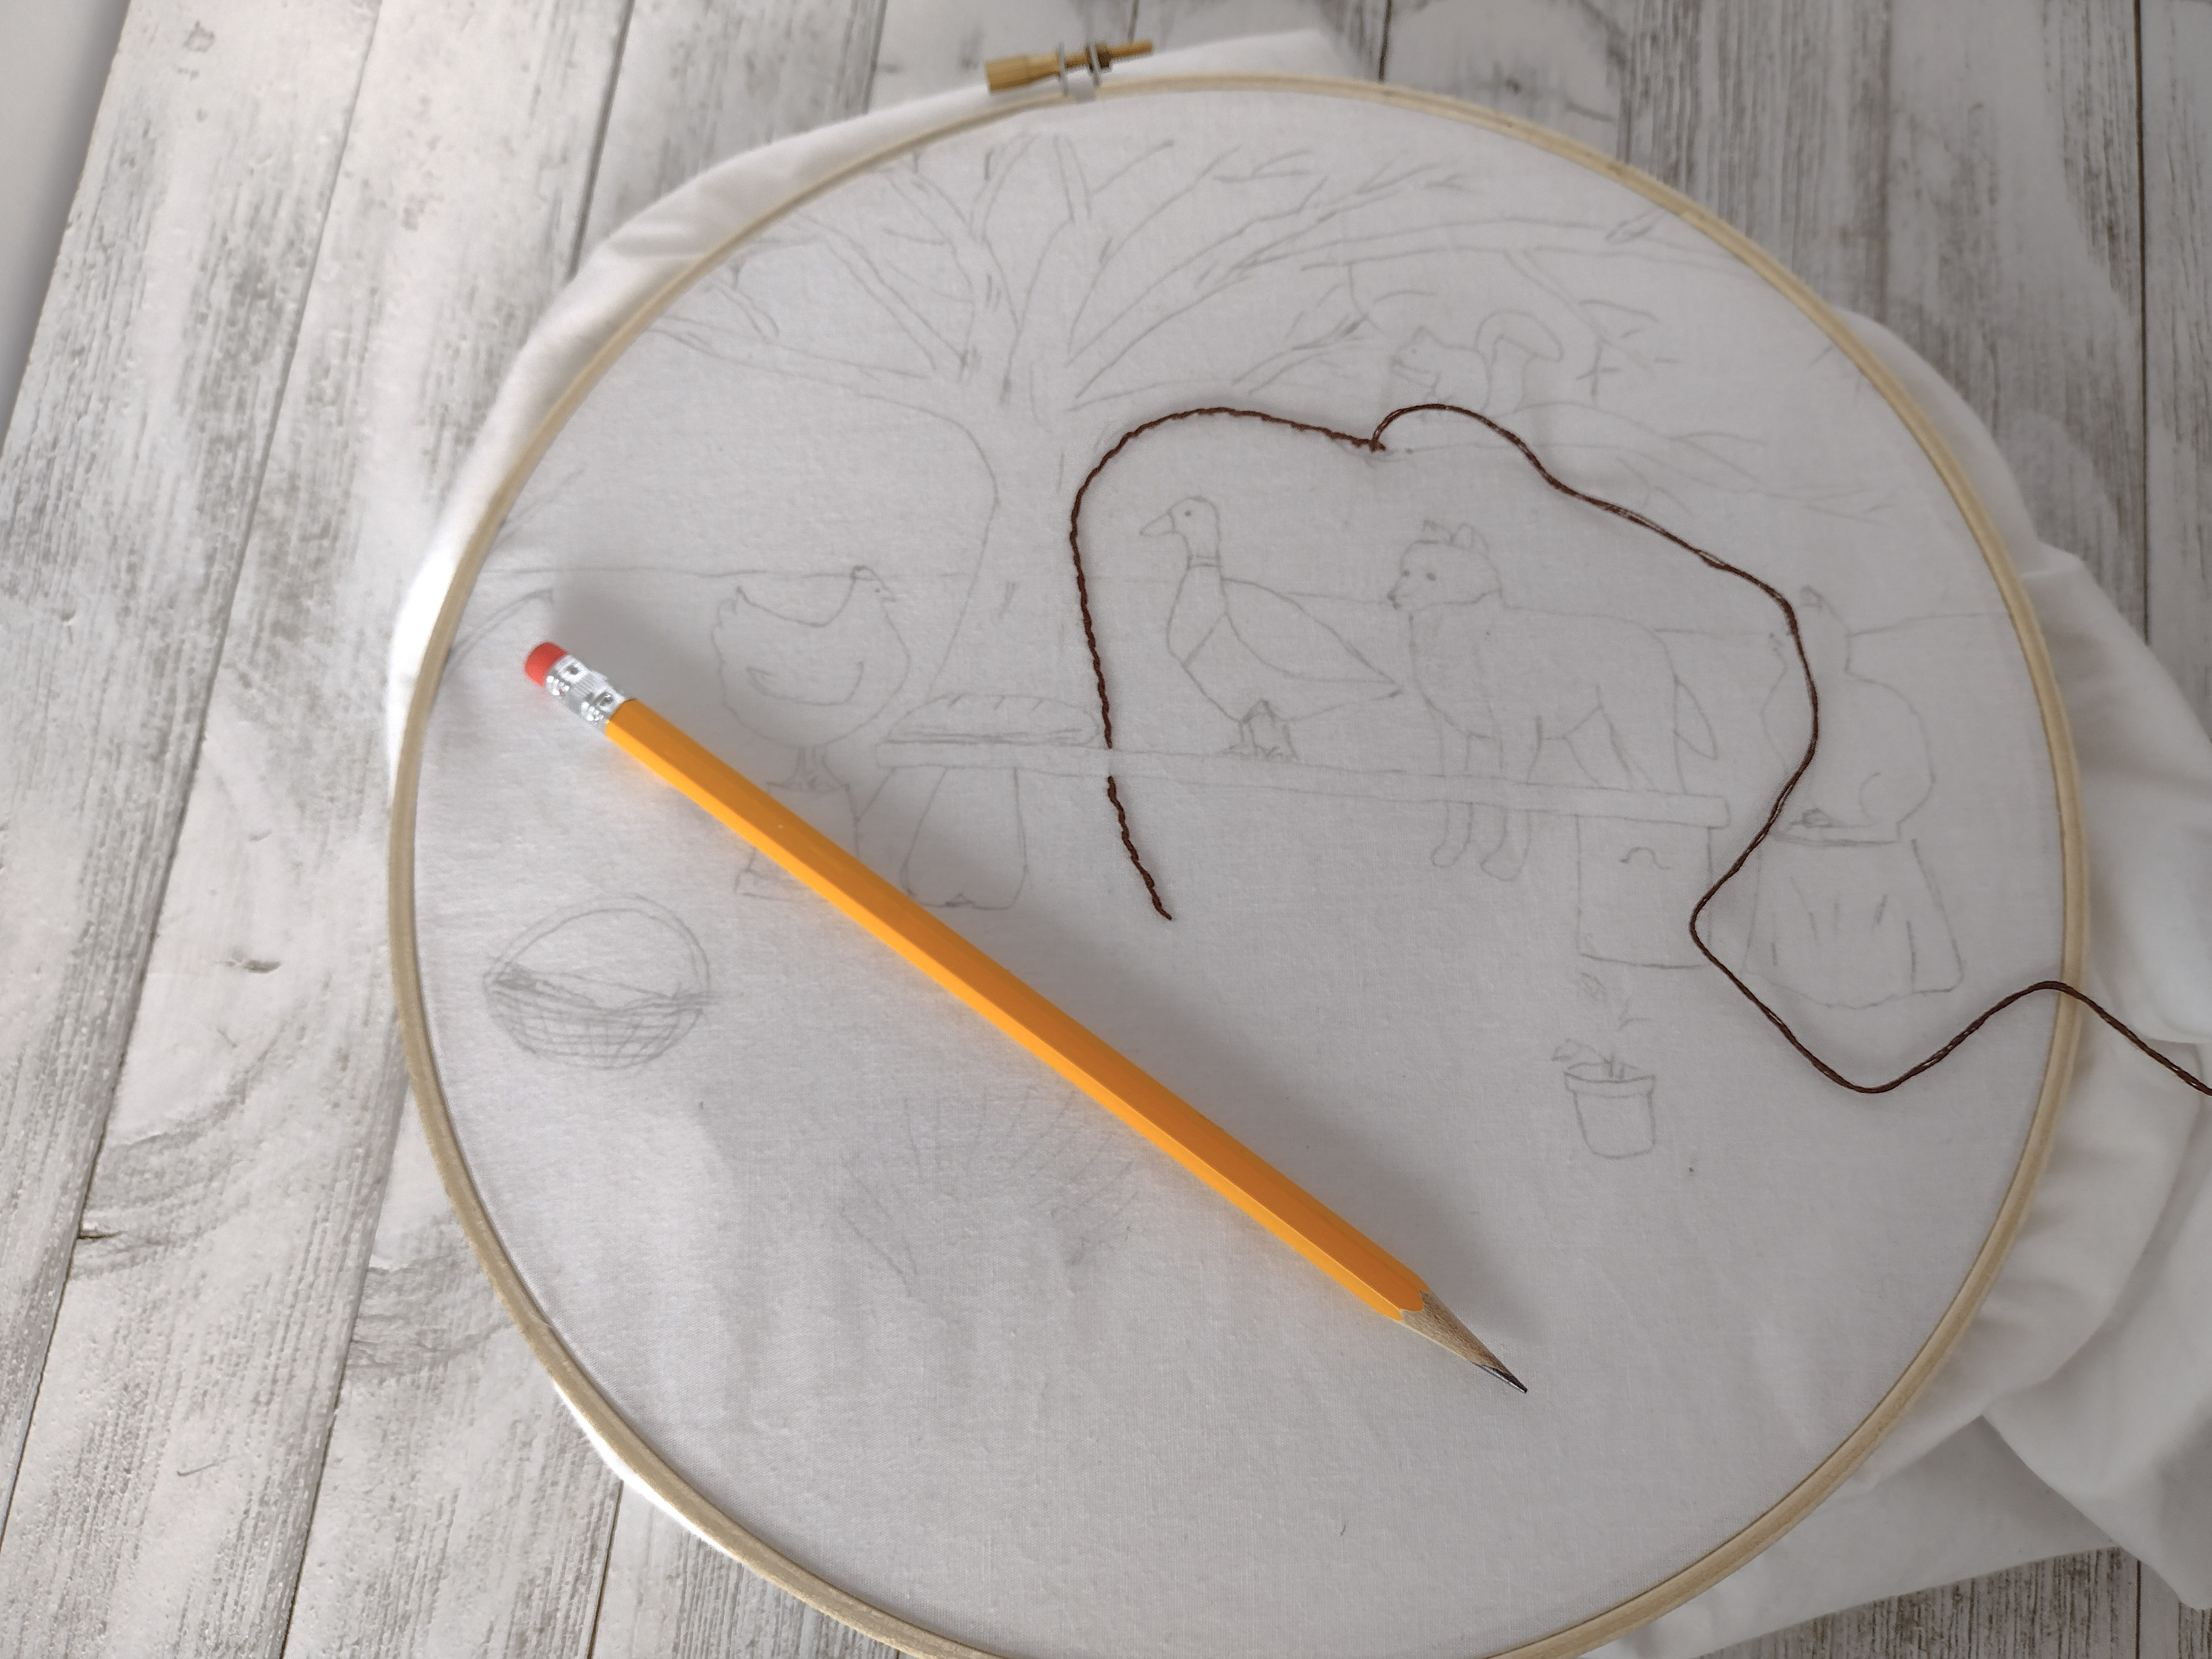 embroidery hoop pencil embroider oattern